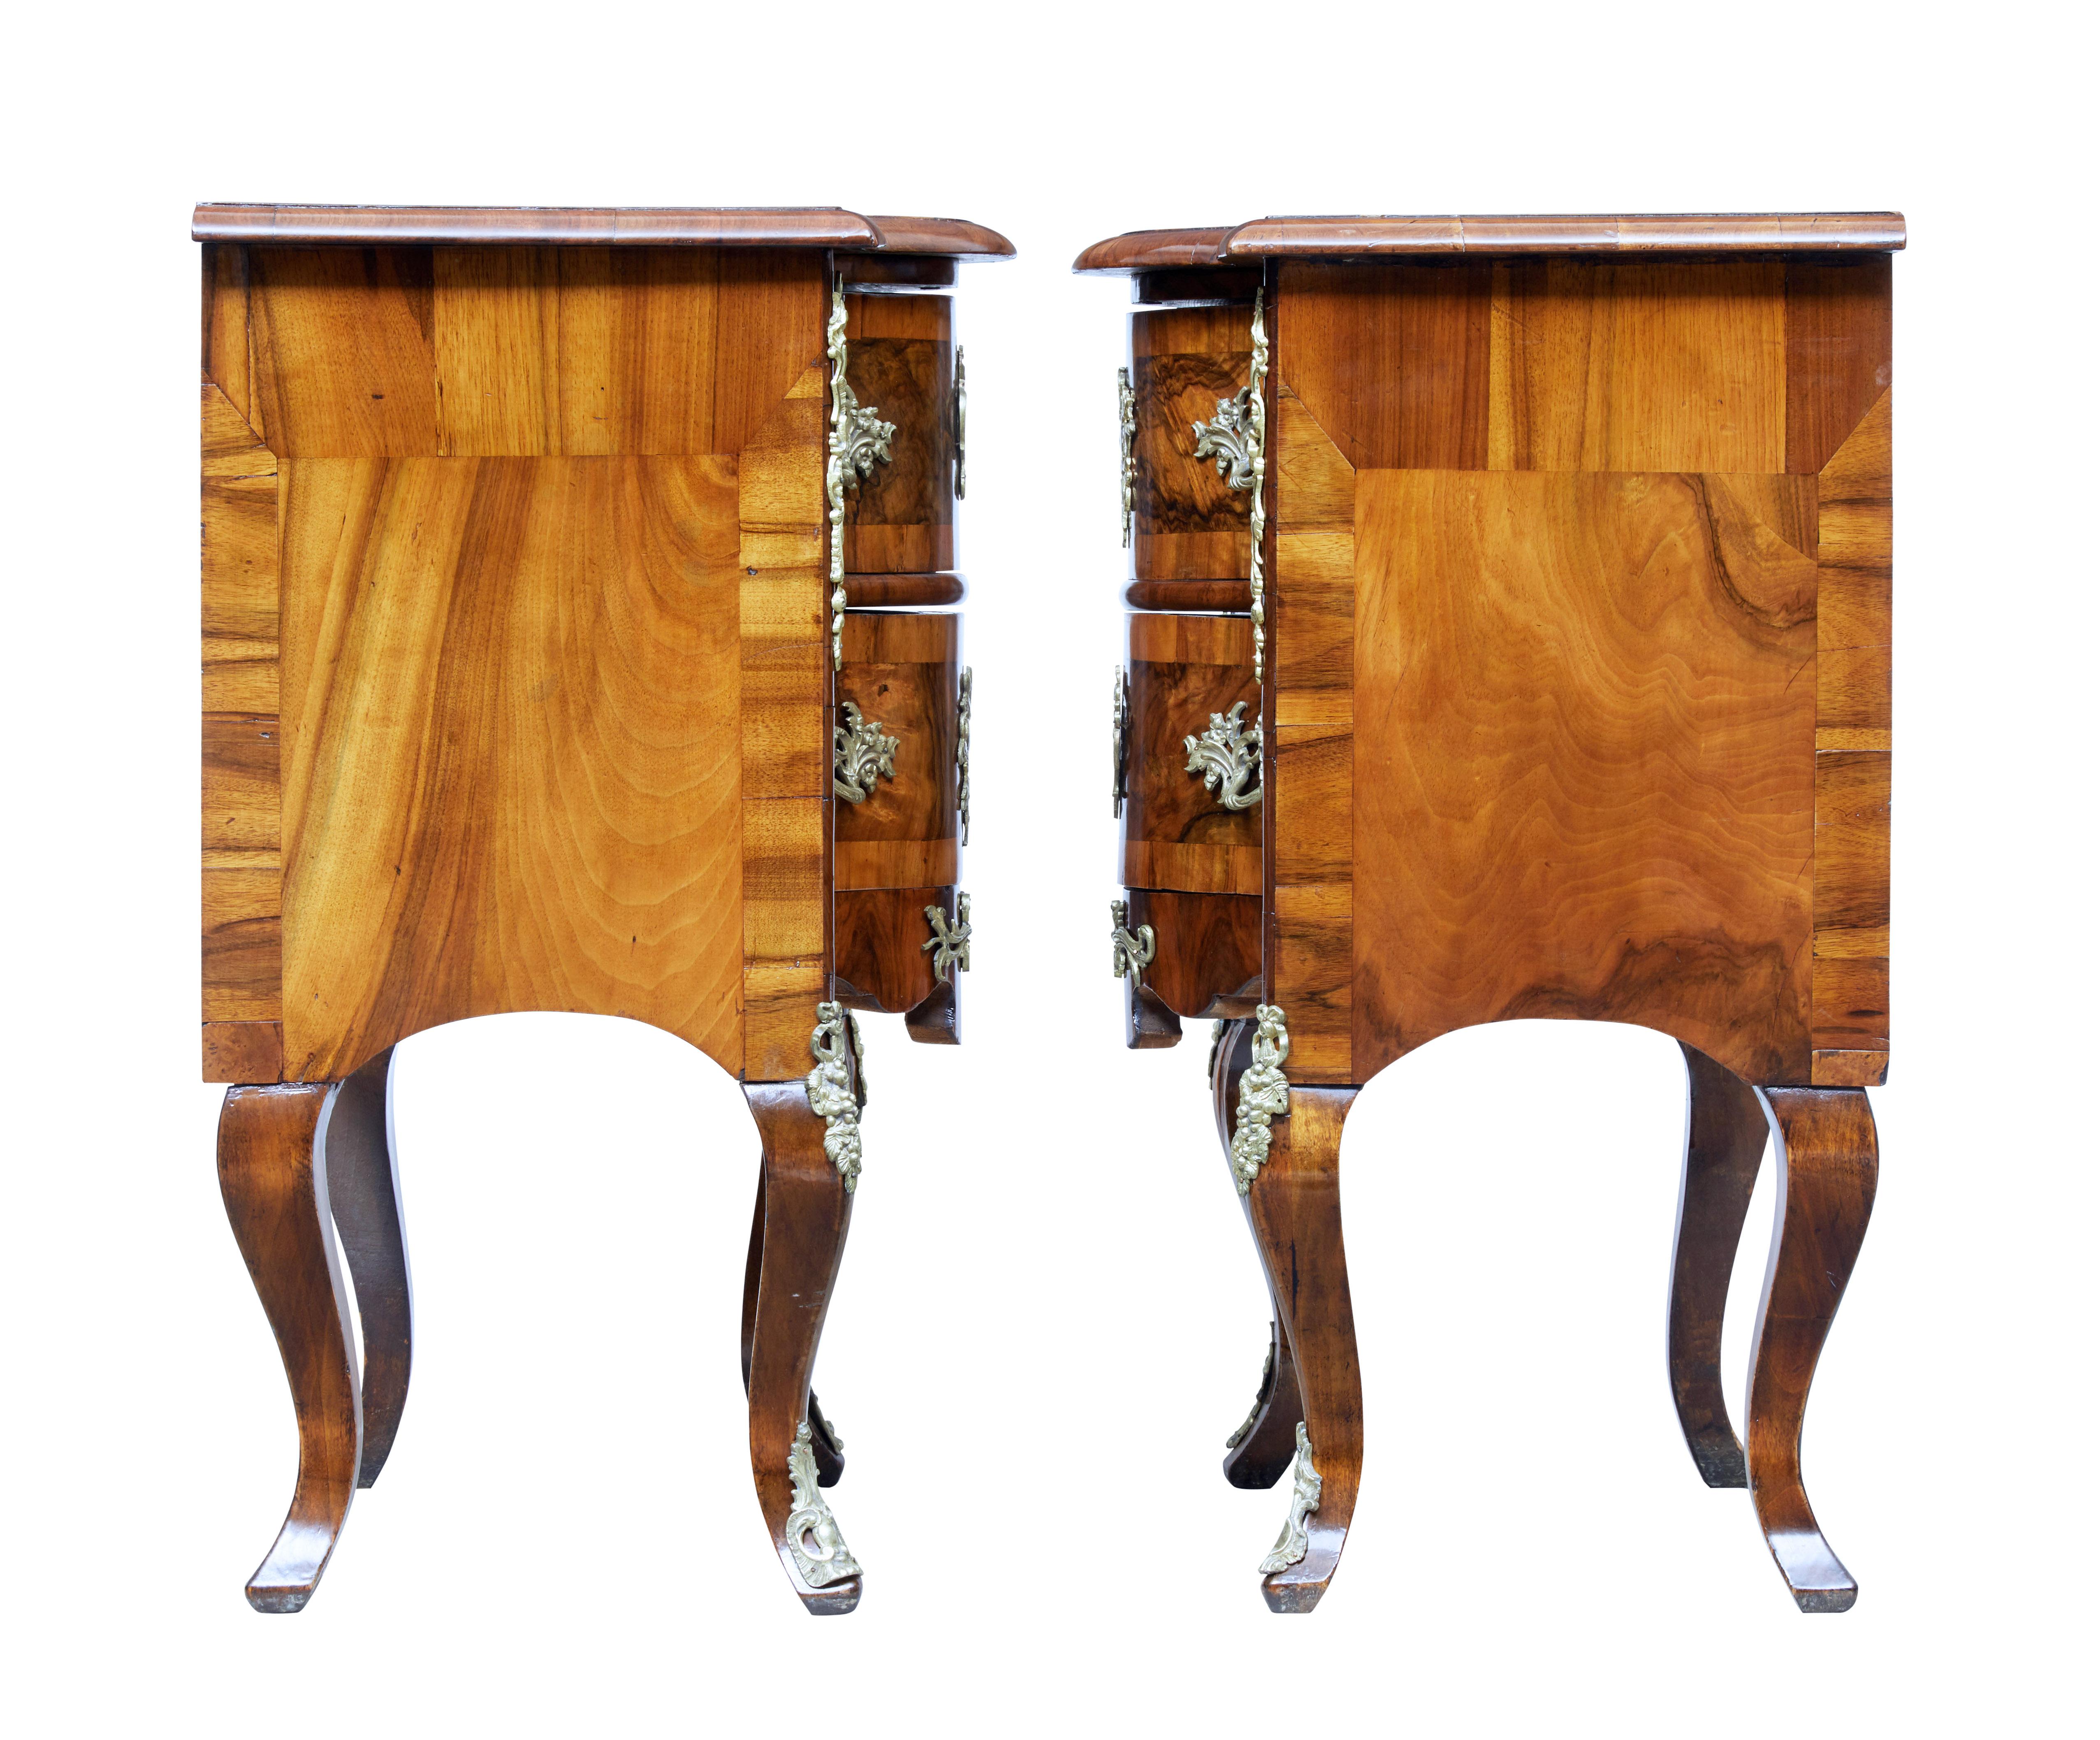 Woodwork Pair of Small Mid-19th Century Continental Walnut Commodes